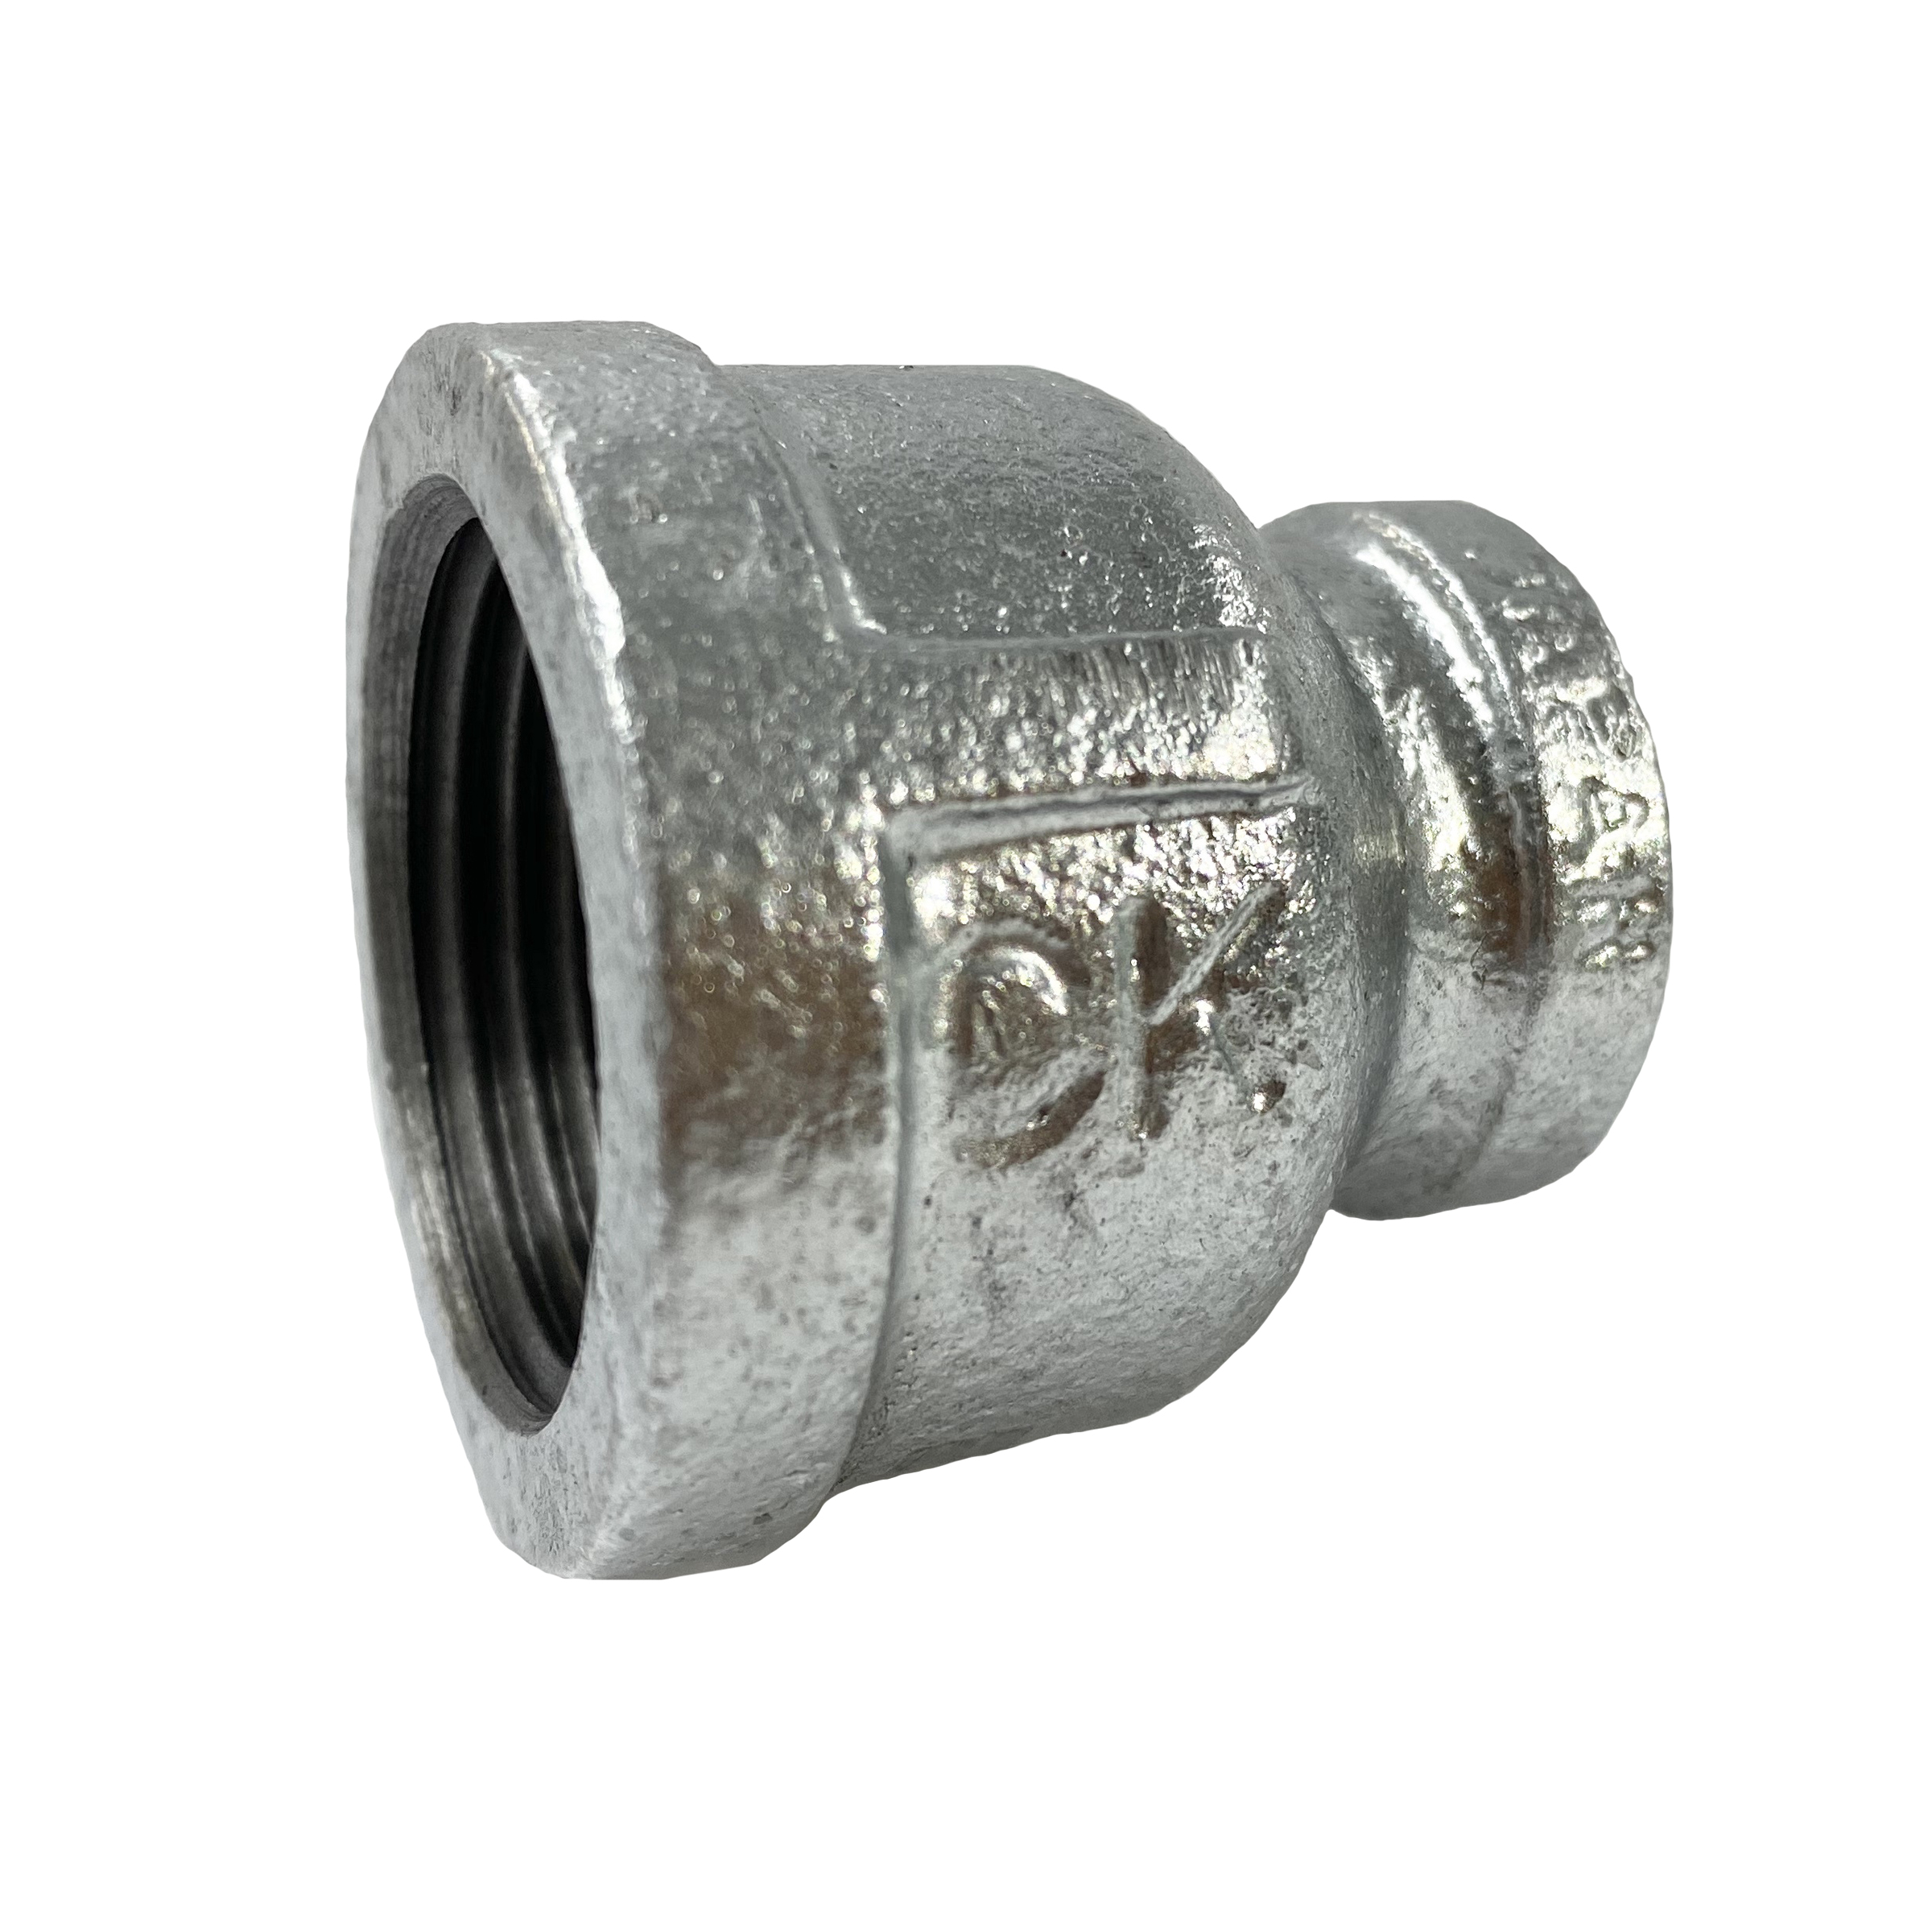 CK Fittings - Screw-in Type Malleable Cast Iron Pipe Fitting - Socket with Different Diameters with Band (BRS-32X25-W) 